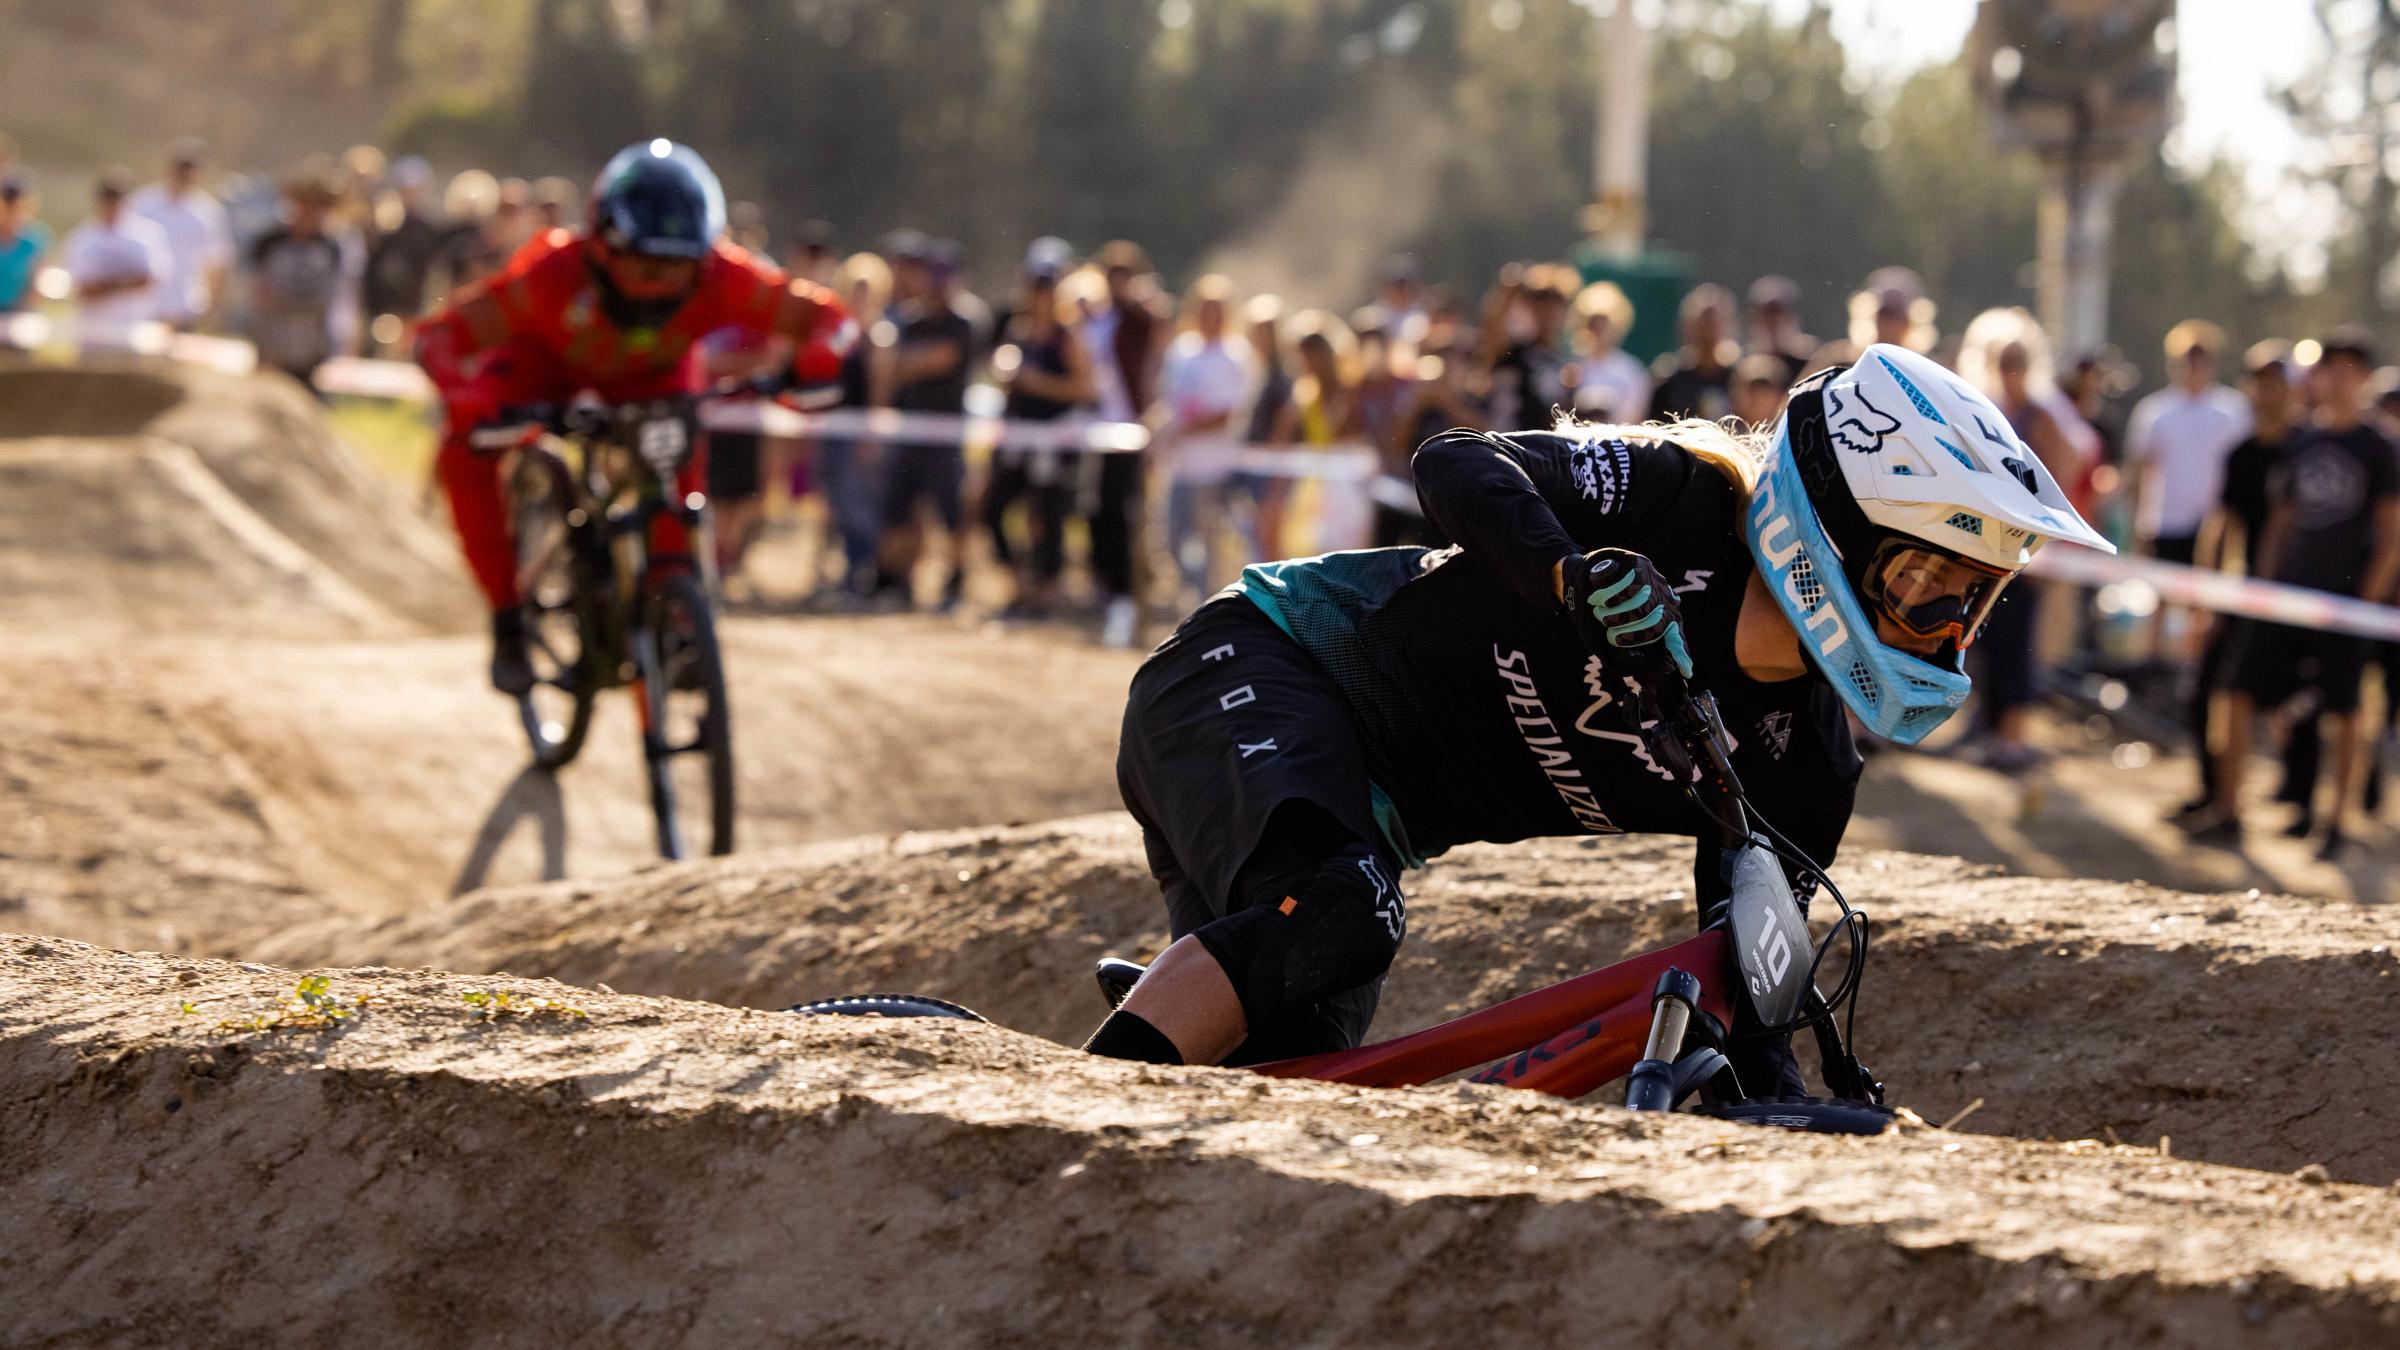 Two mountain bikers racing in a dual slalom course